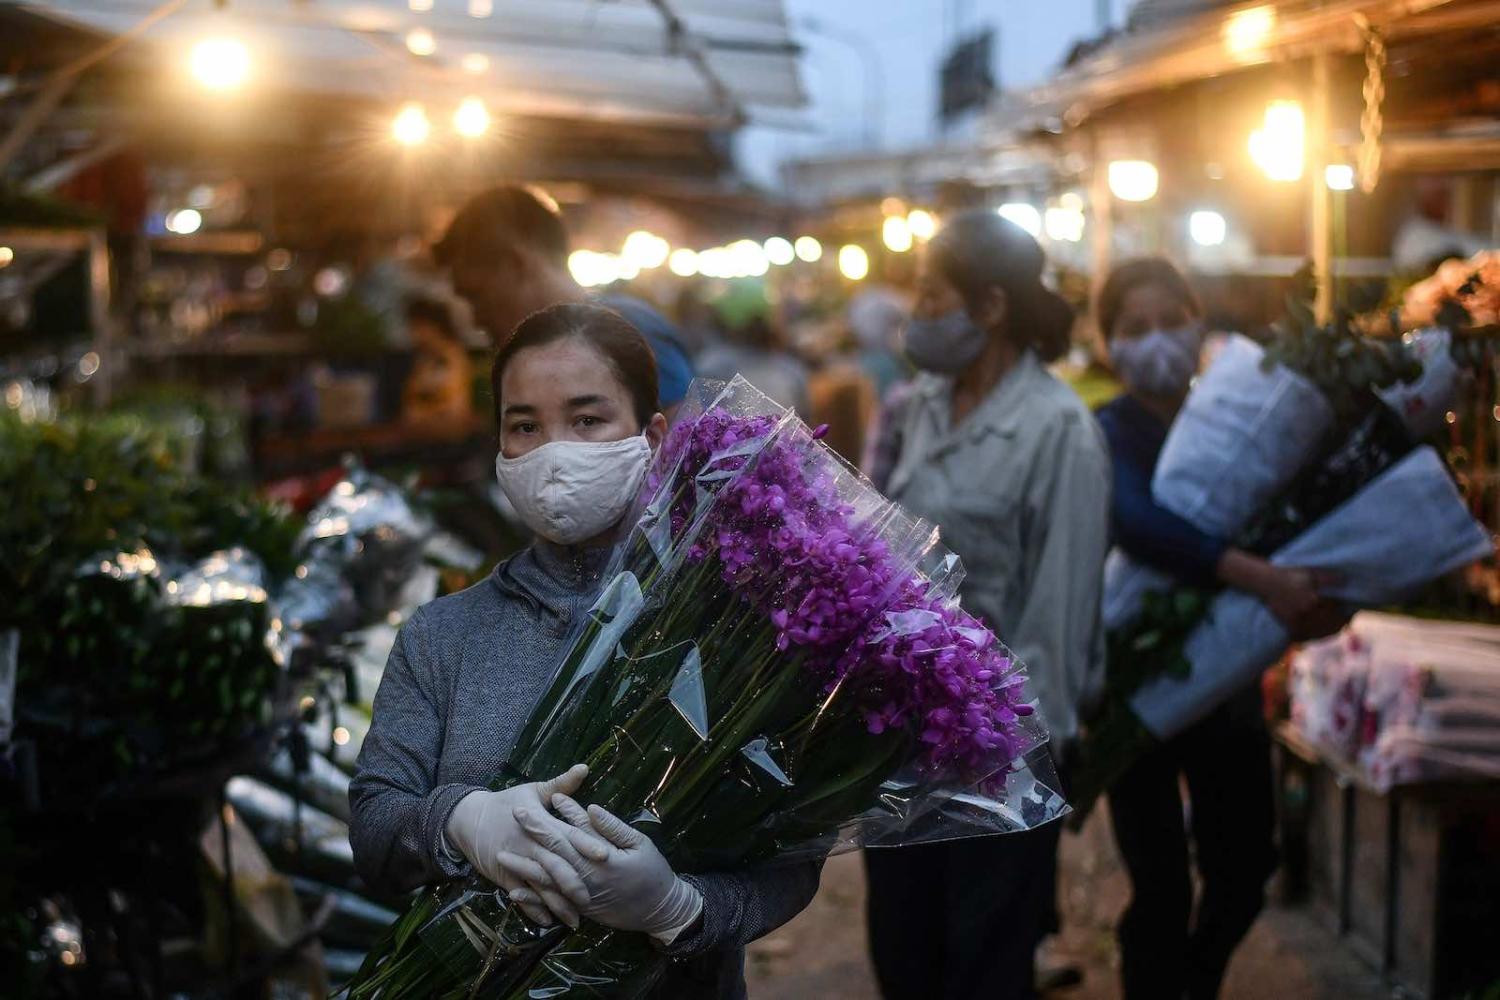 A woman carries flowers at the Quang Ba flower market in Hanoi, 11 May (Manan Vatsyayana/AFP via Getty Images)